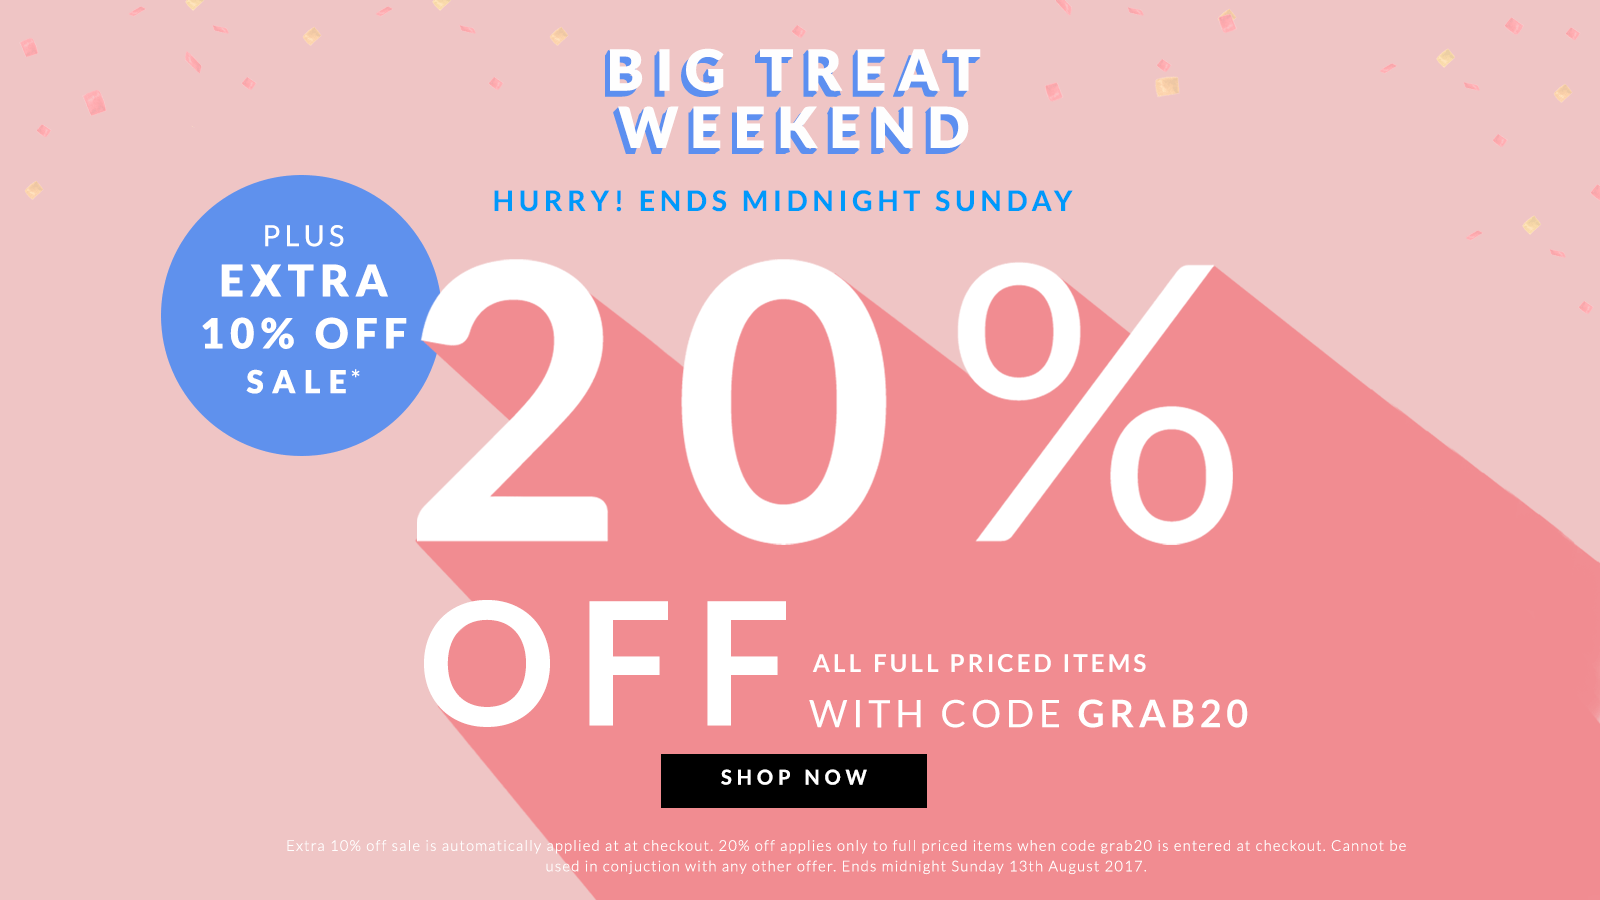 Chi Chi: 20% off all ful priced items plus extra 10% off sale